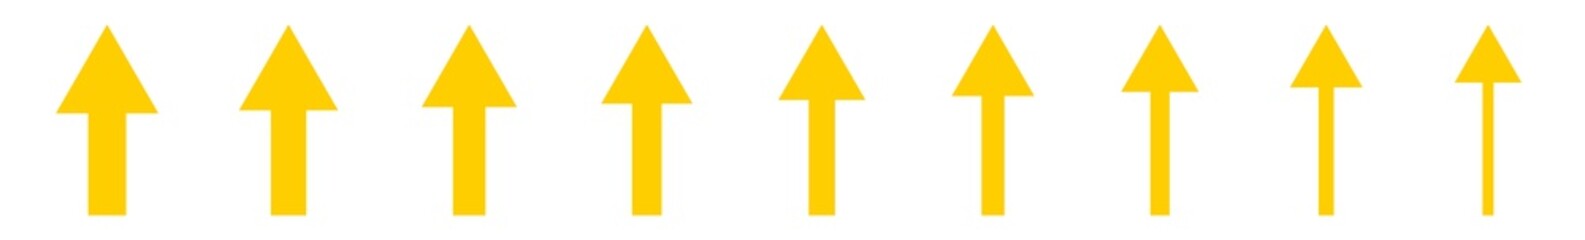 Arrow Icon Yellow | Arrows | Infographic Illustration | Direction Symbol | Pointer Logo | Up Sign | Isolated | Variations